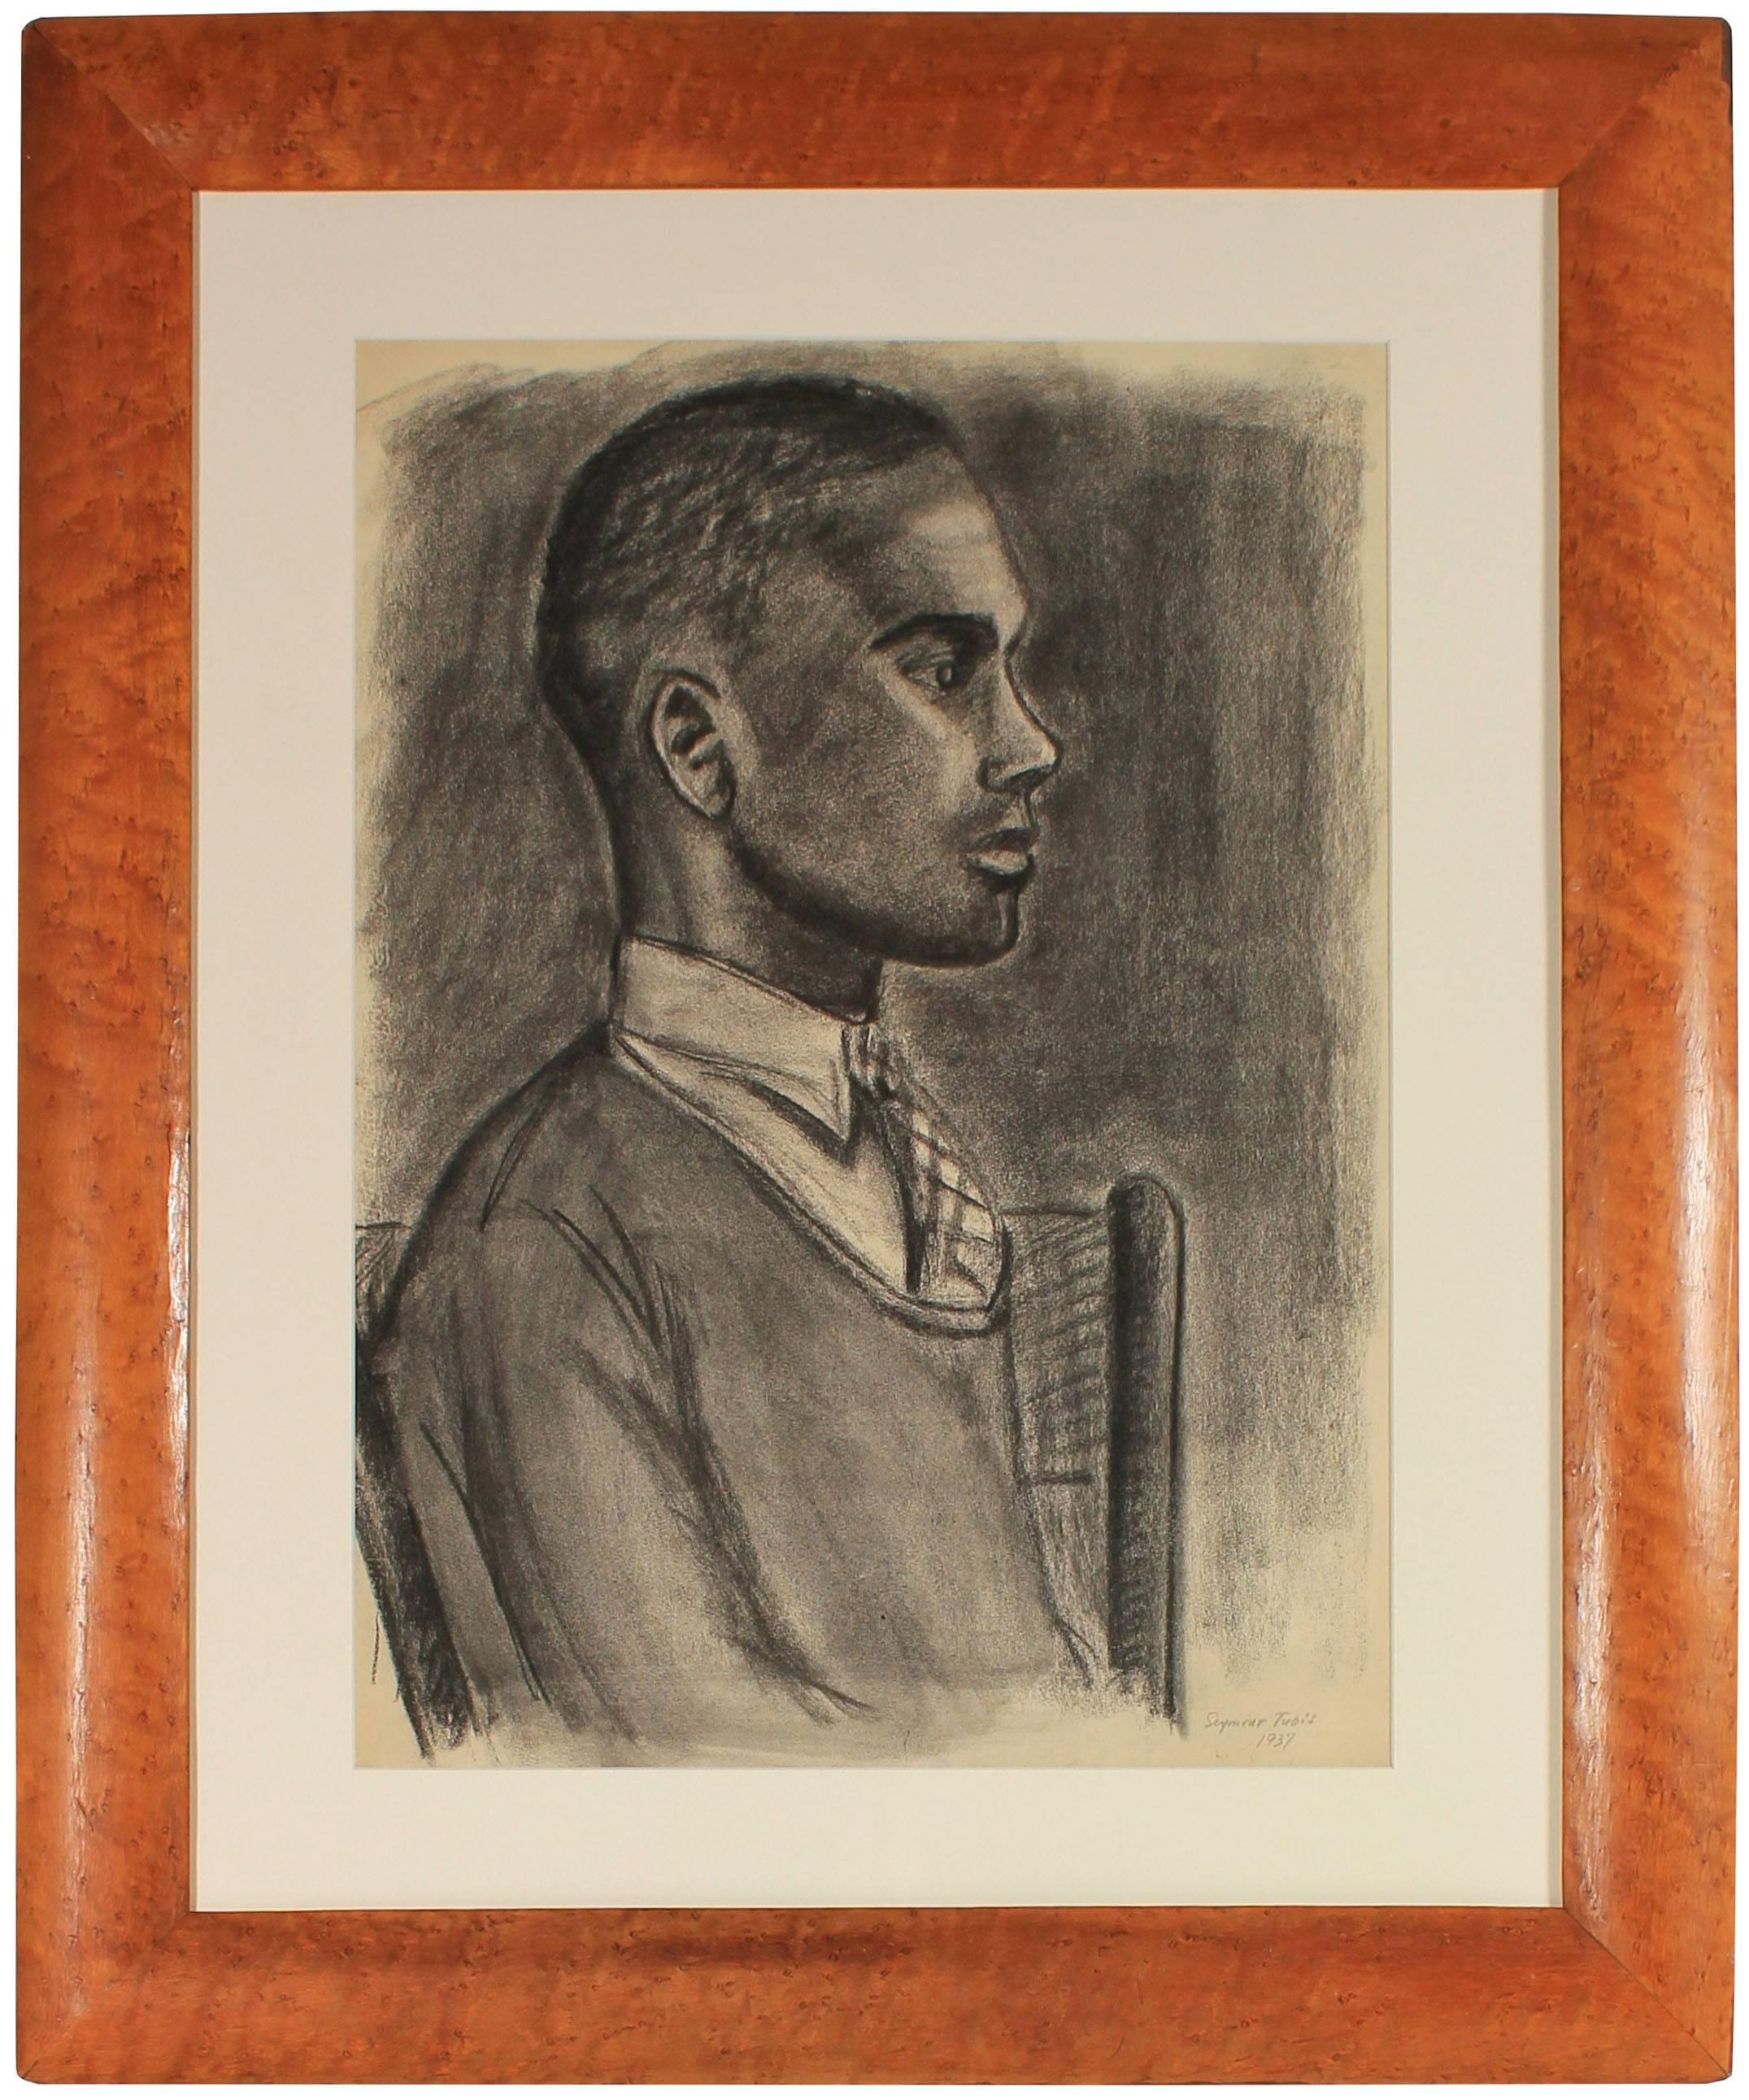 Charcoal Portrait of a Young Man - Art by Seymour Tubis